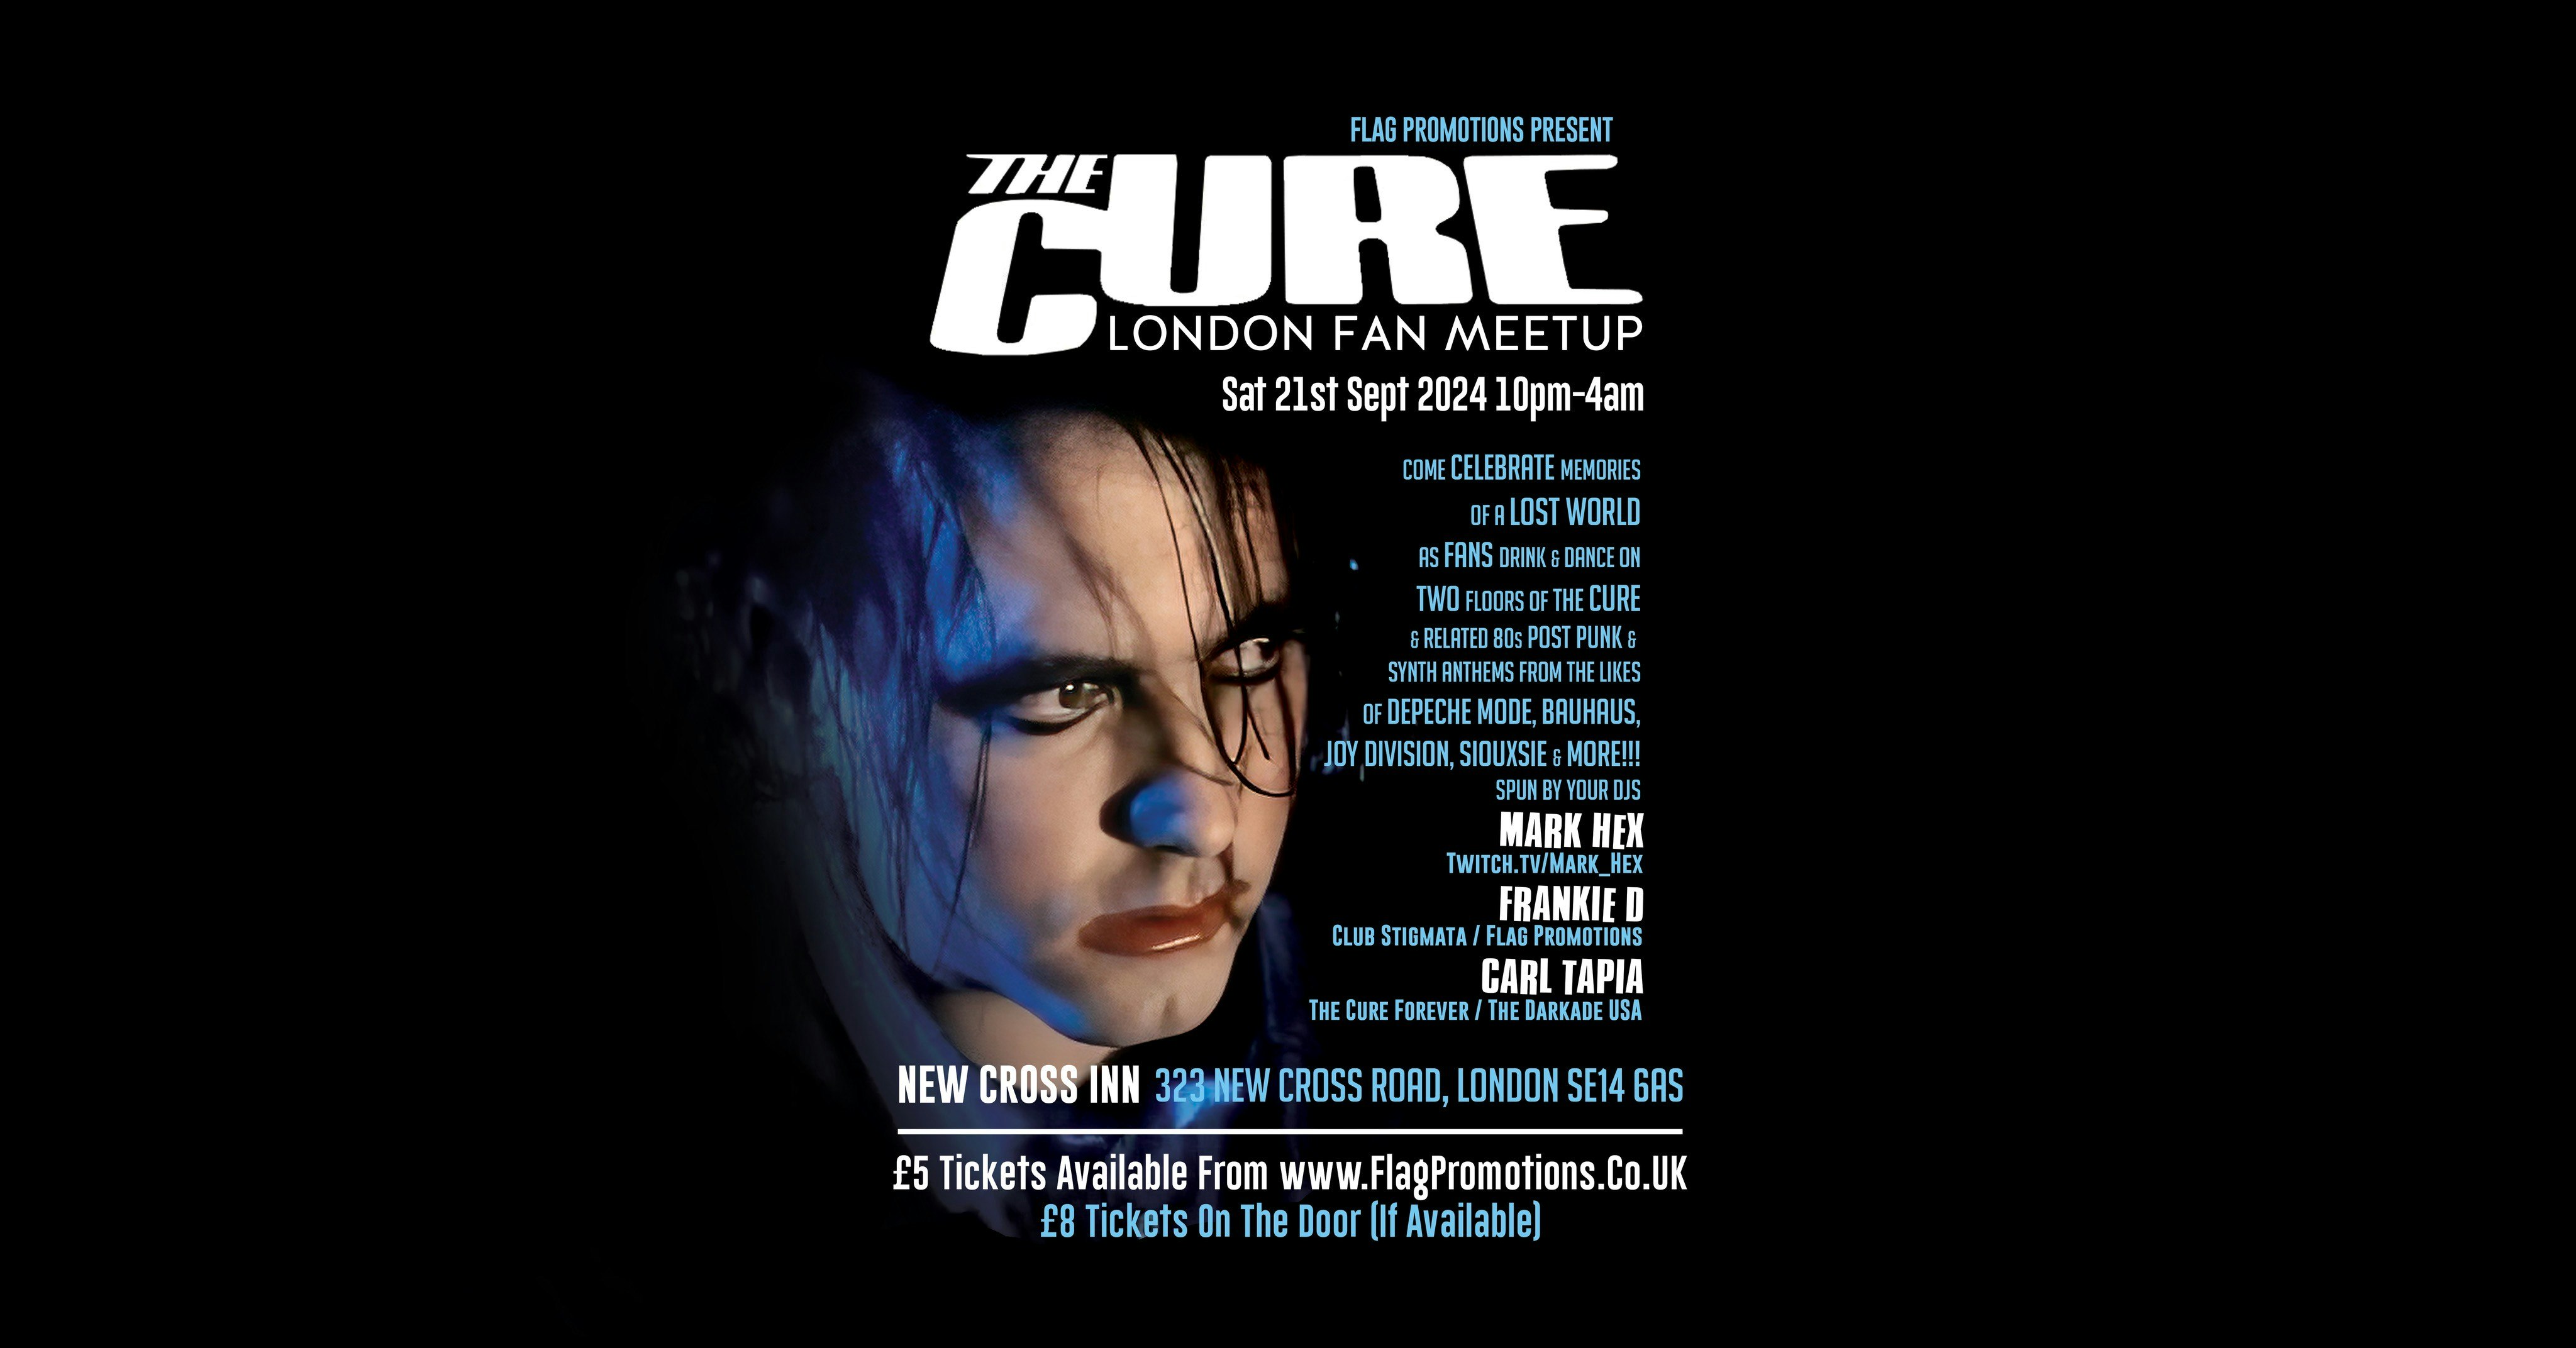 Flag Promotions Presents THE CURE  – London Fan Meet Up!